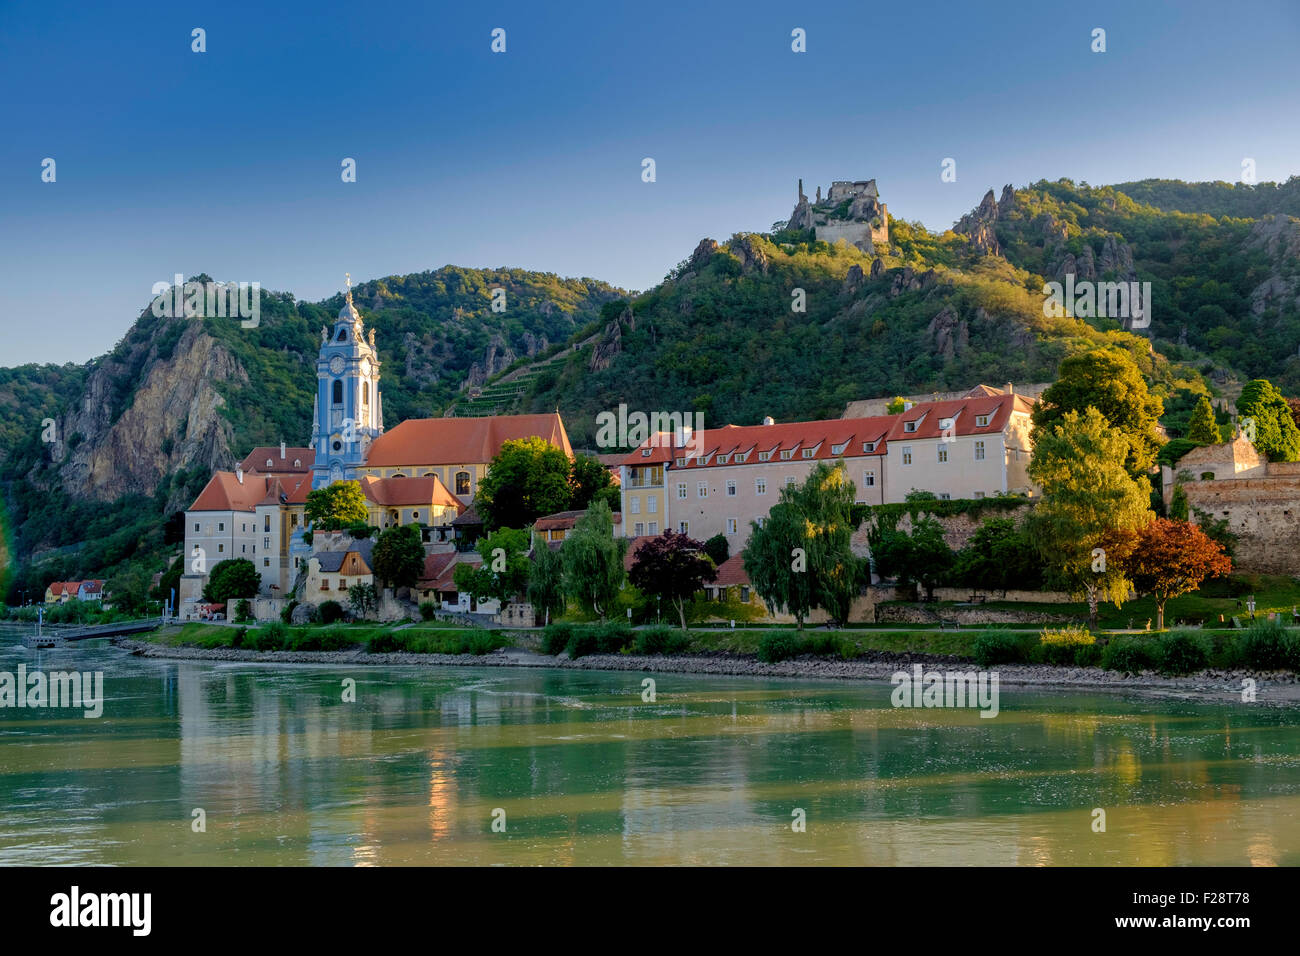 Durnstein on the banks of the Danube in Austria in the Wachau Valley.Ruins of   Kuenringer Castle on the hilltop . Church spire. Stock Photo